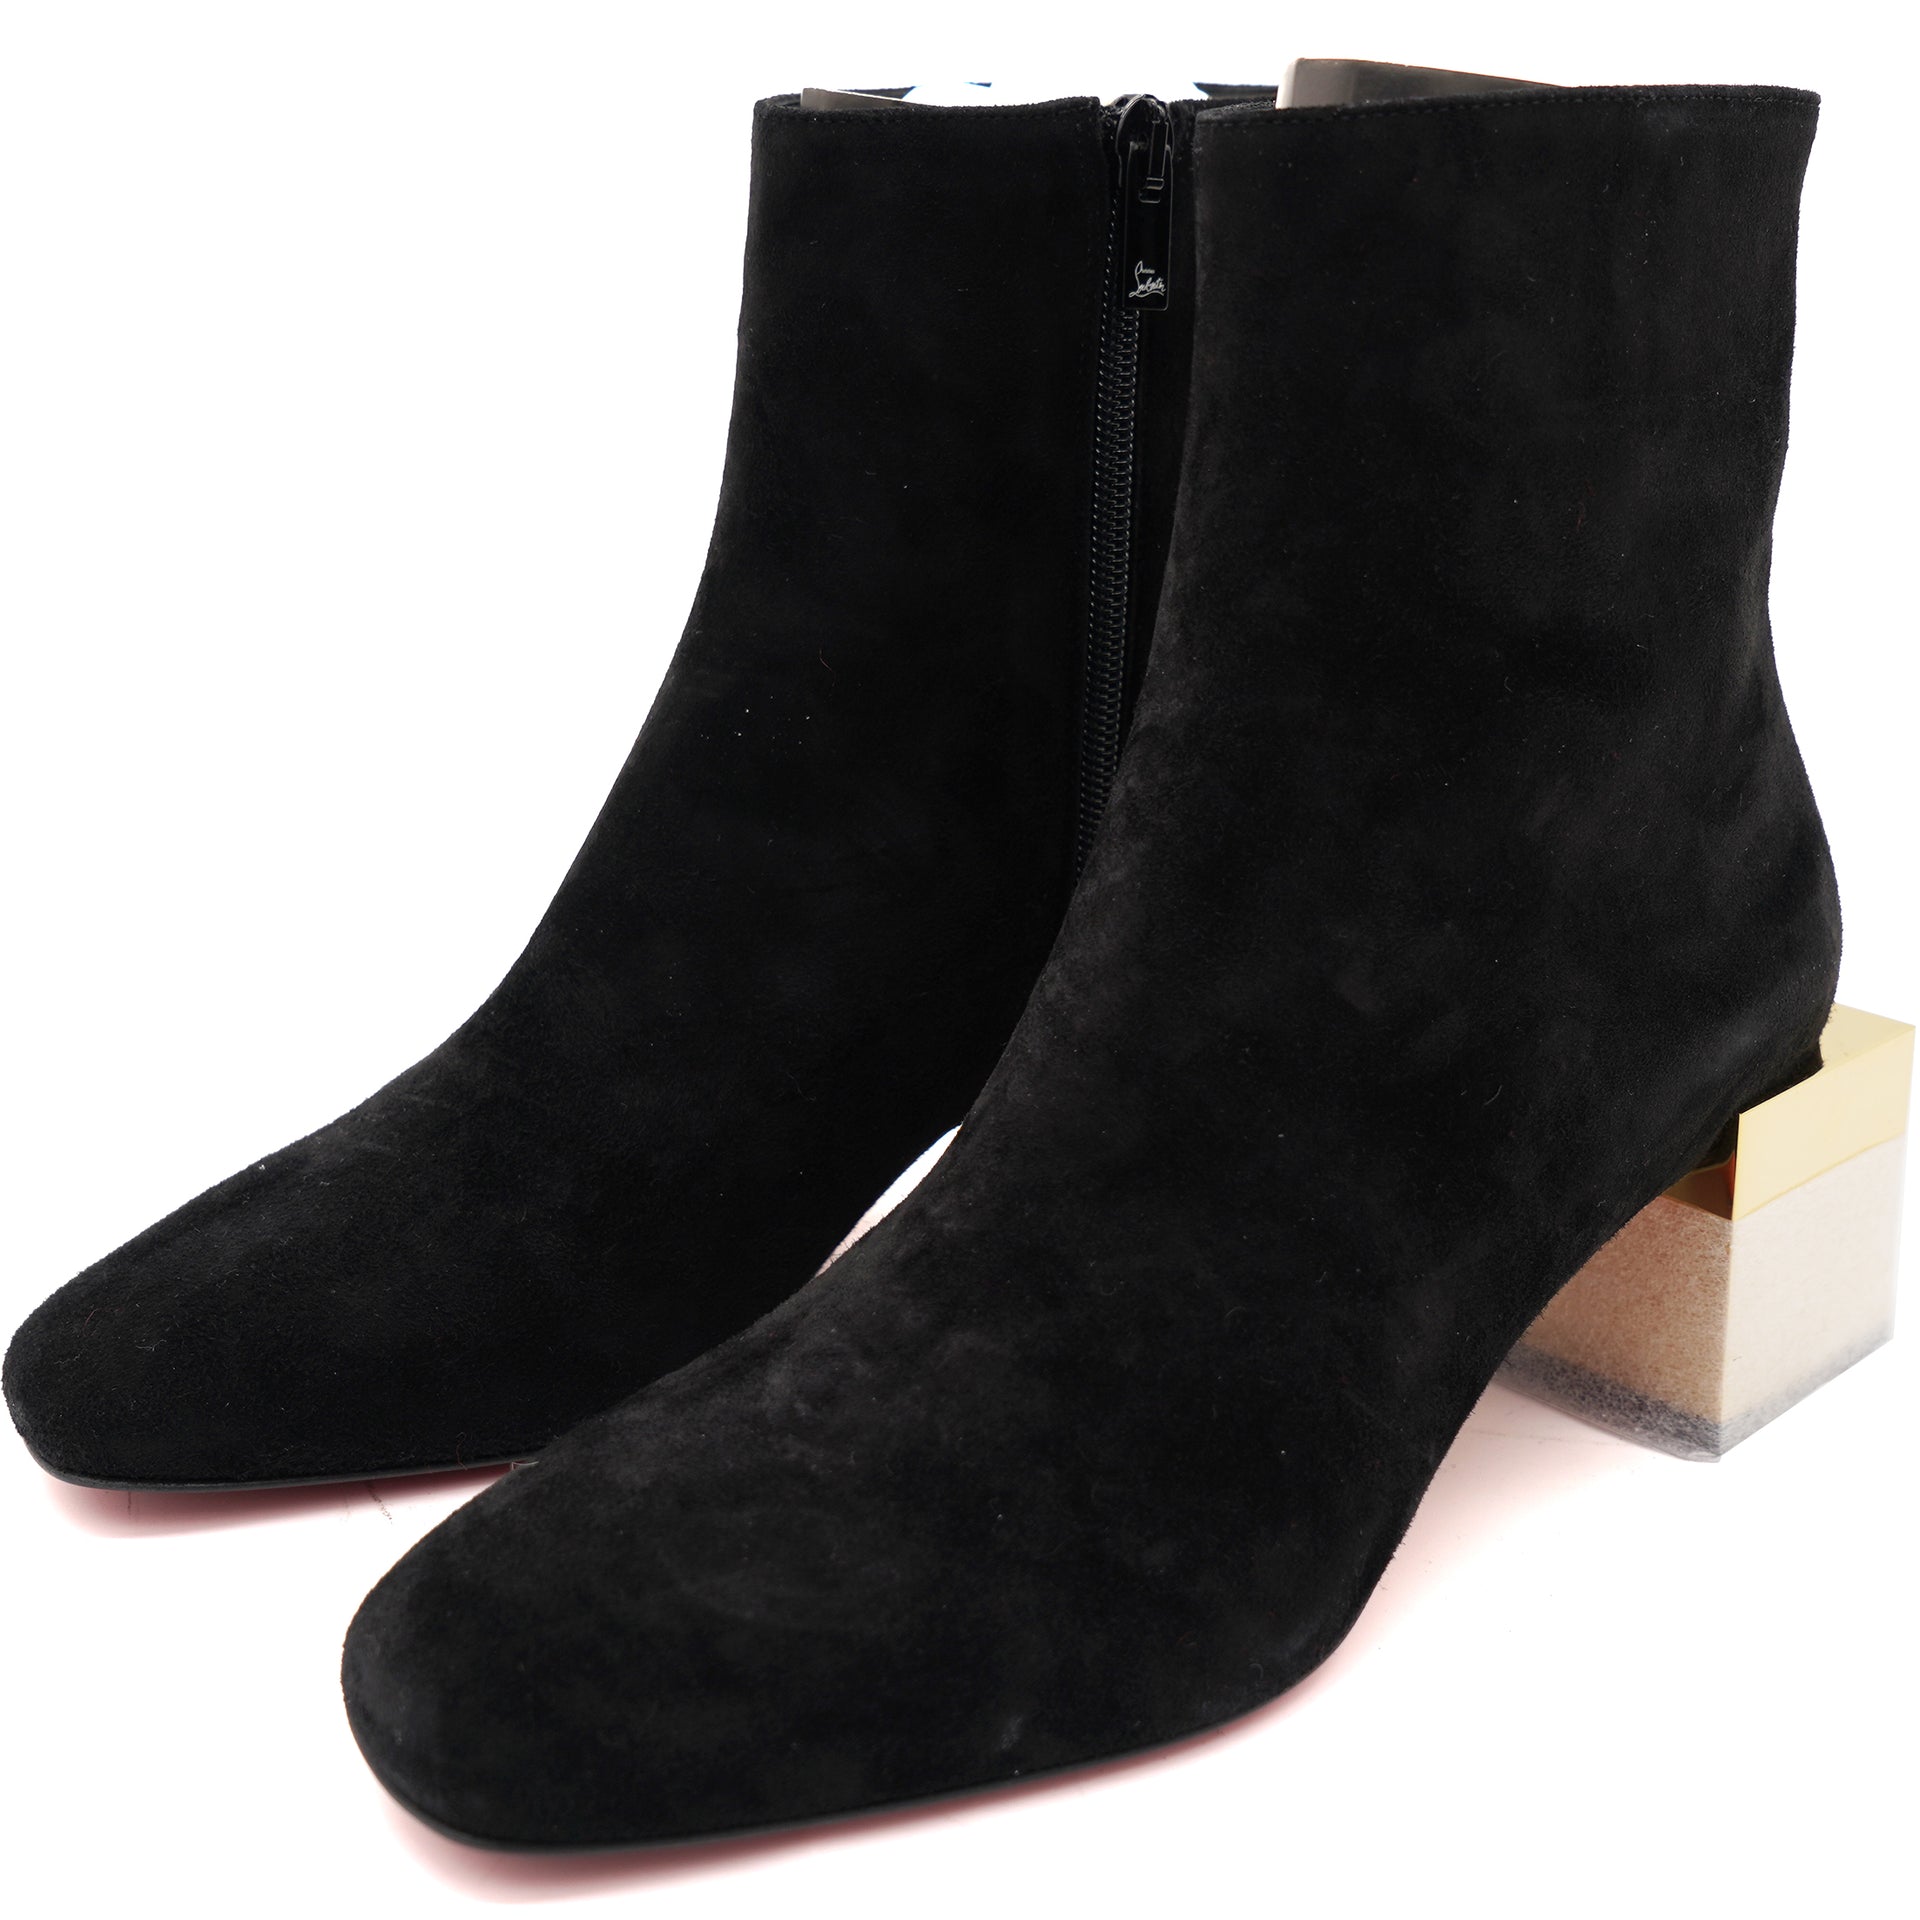 Black Suede Gold Block Heels Ankle Boots 36